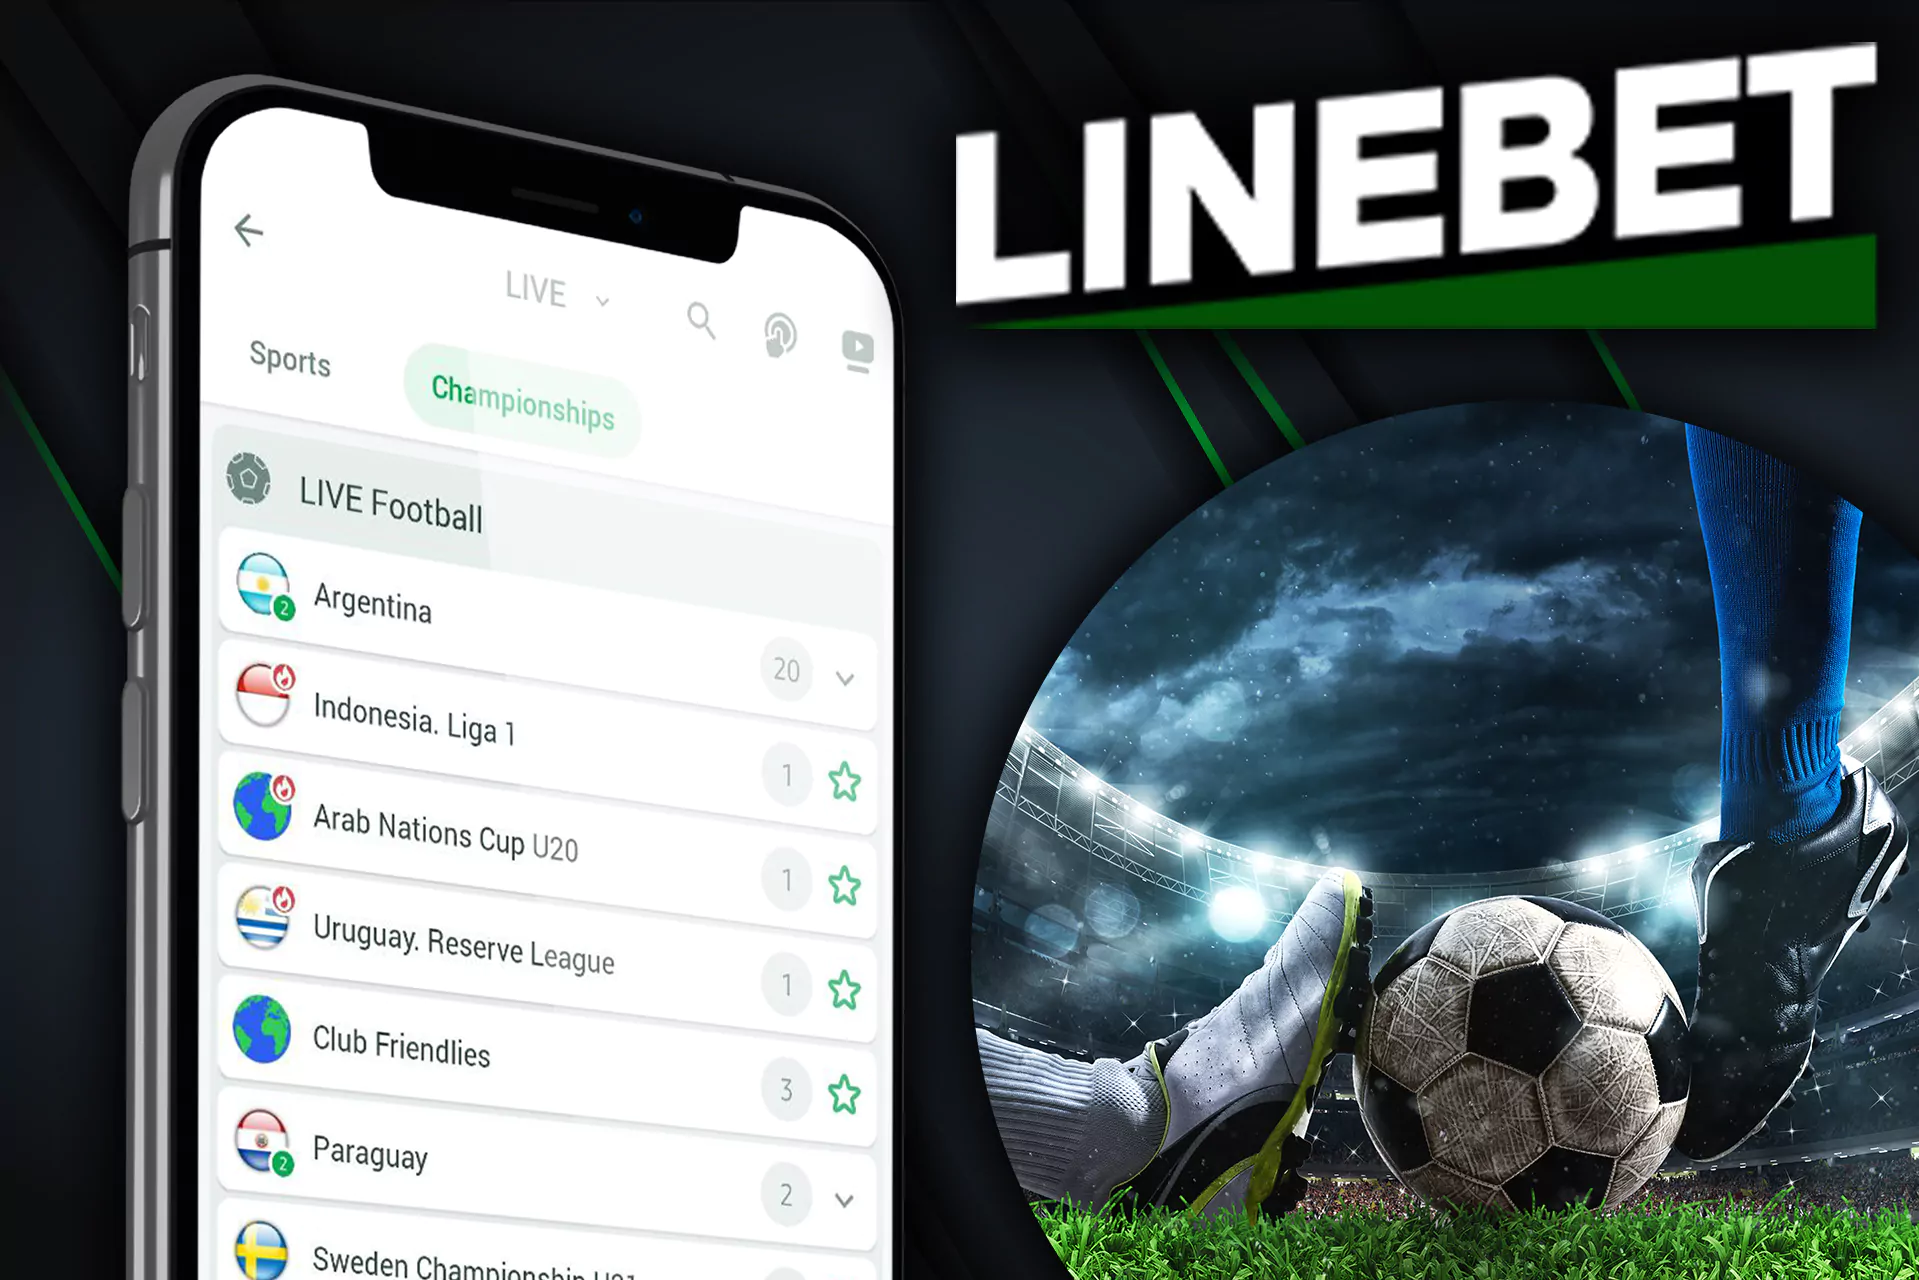 Football is available for betting at Linebet.